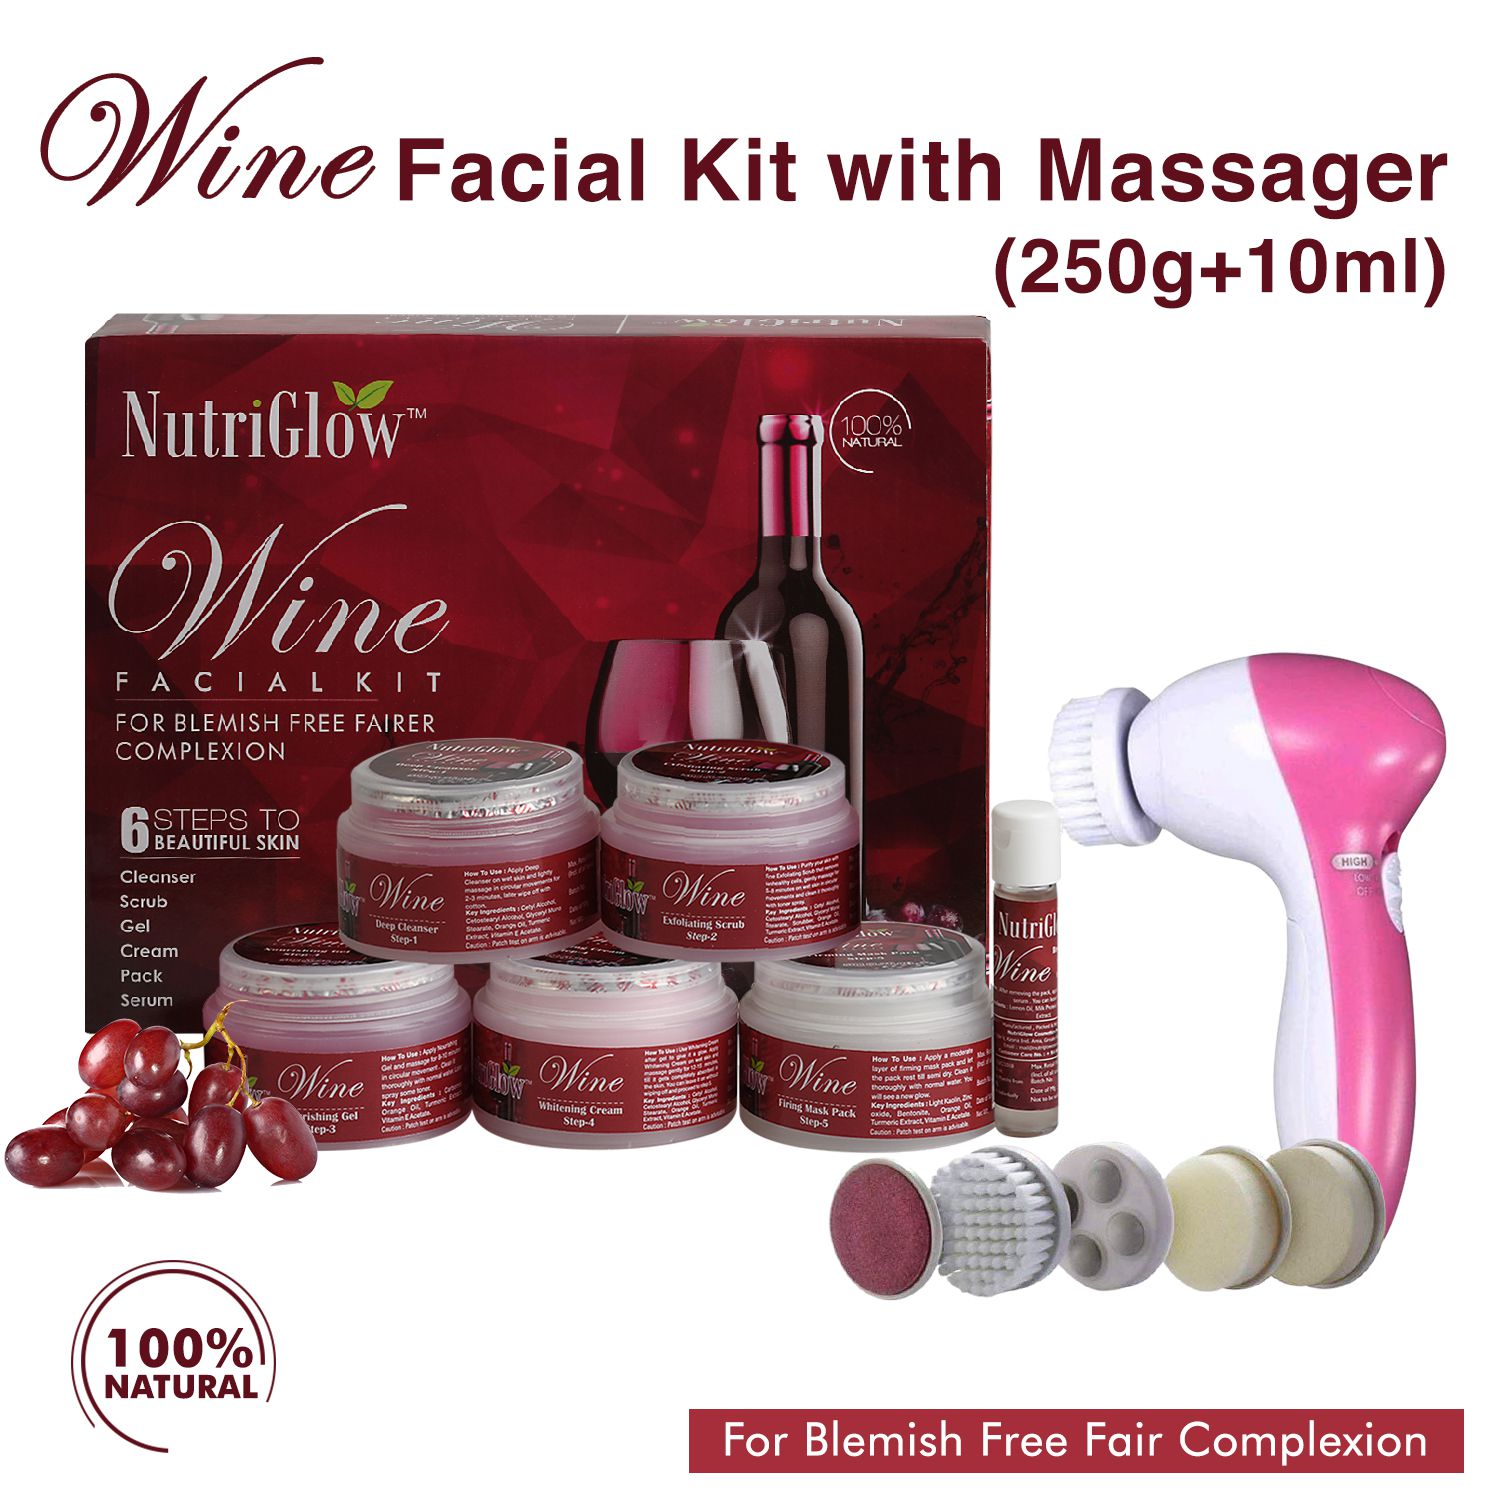     			NutriGlow Wine Facial Cleanup Kit for Women for Glowing Skin 6-Pieces Skin Care Set 250gm+10ml with Free Face Massager